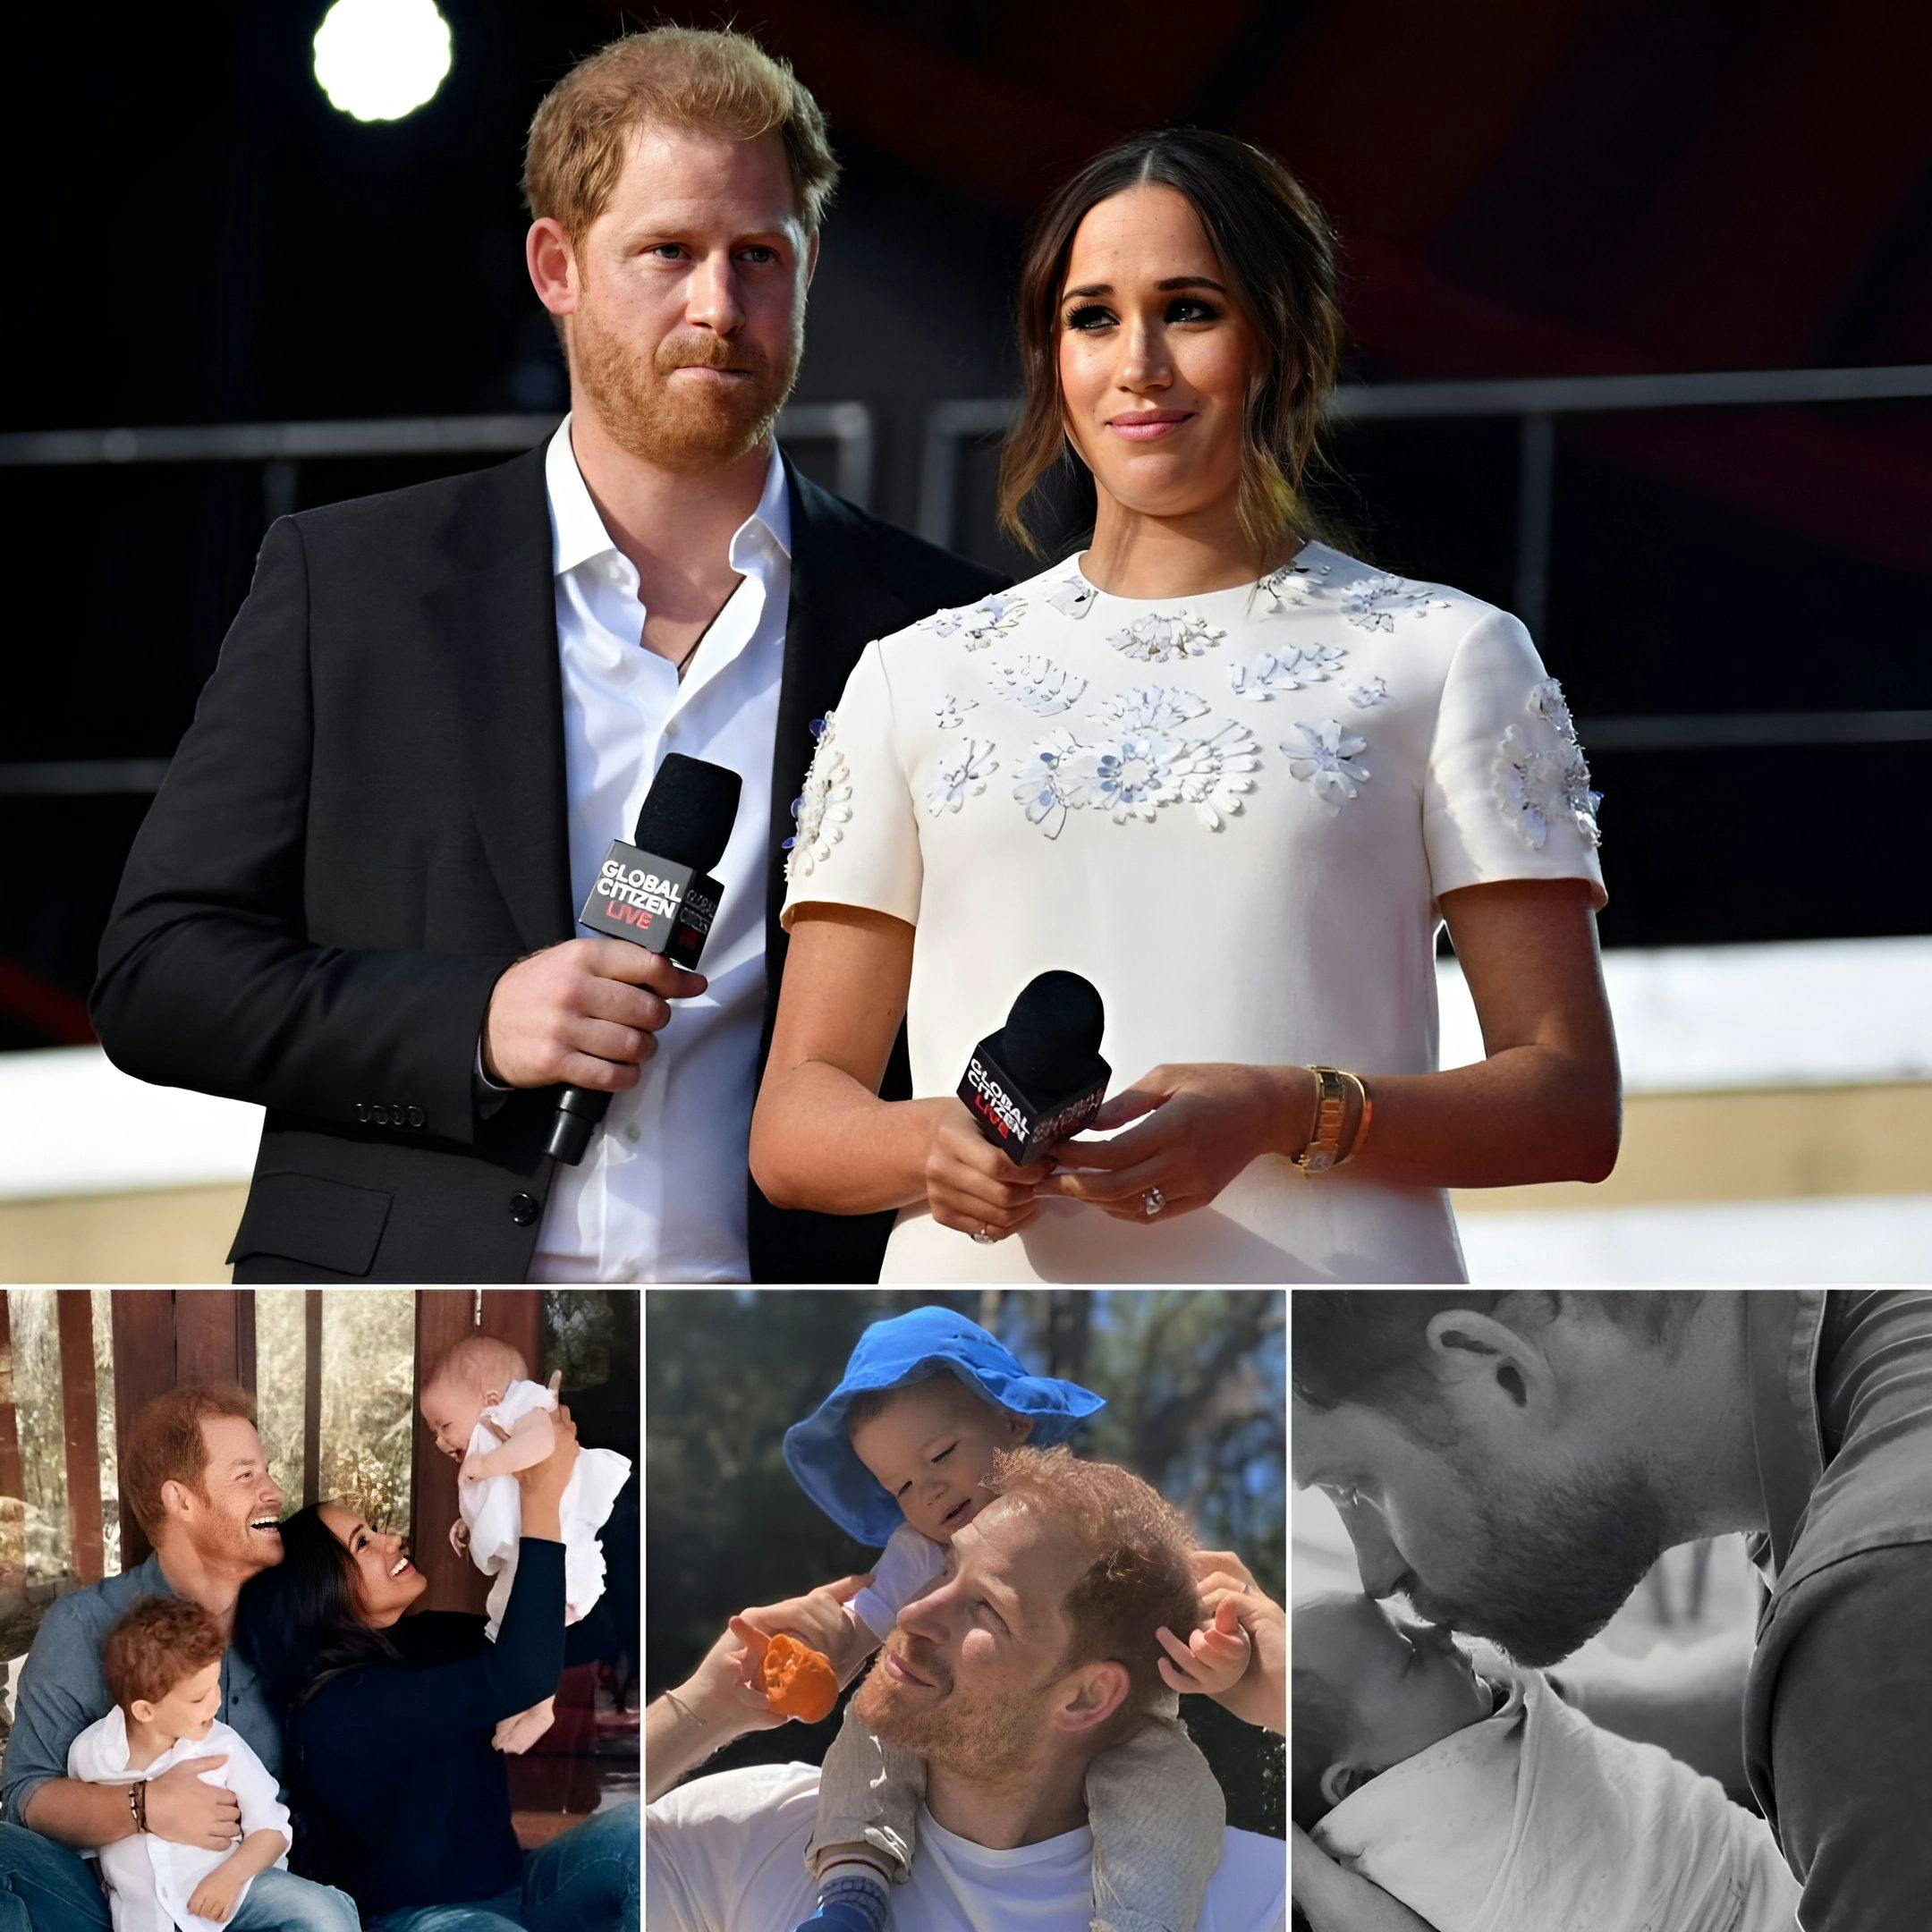 Cover Image for Prince Harry and Meghan Markle’s kids’ title statement missed key prominent word, says expert